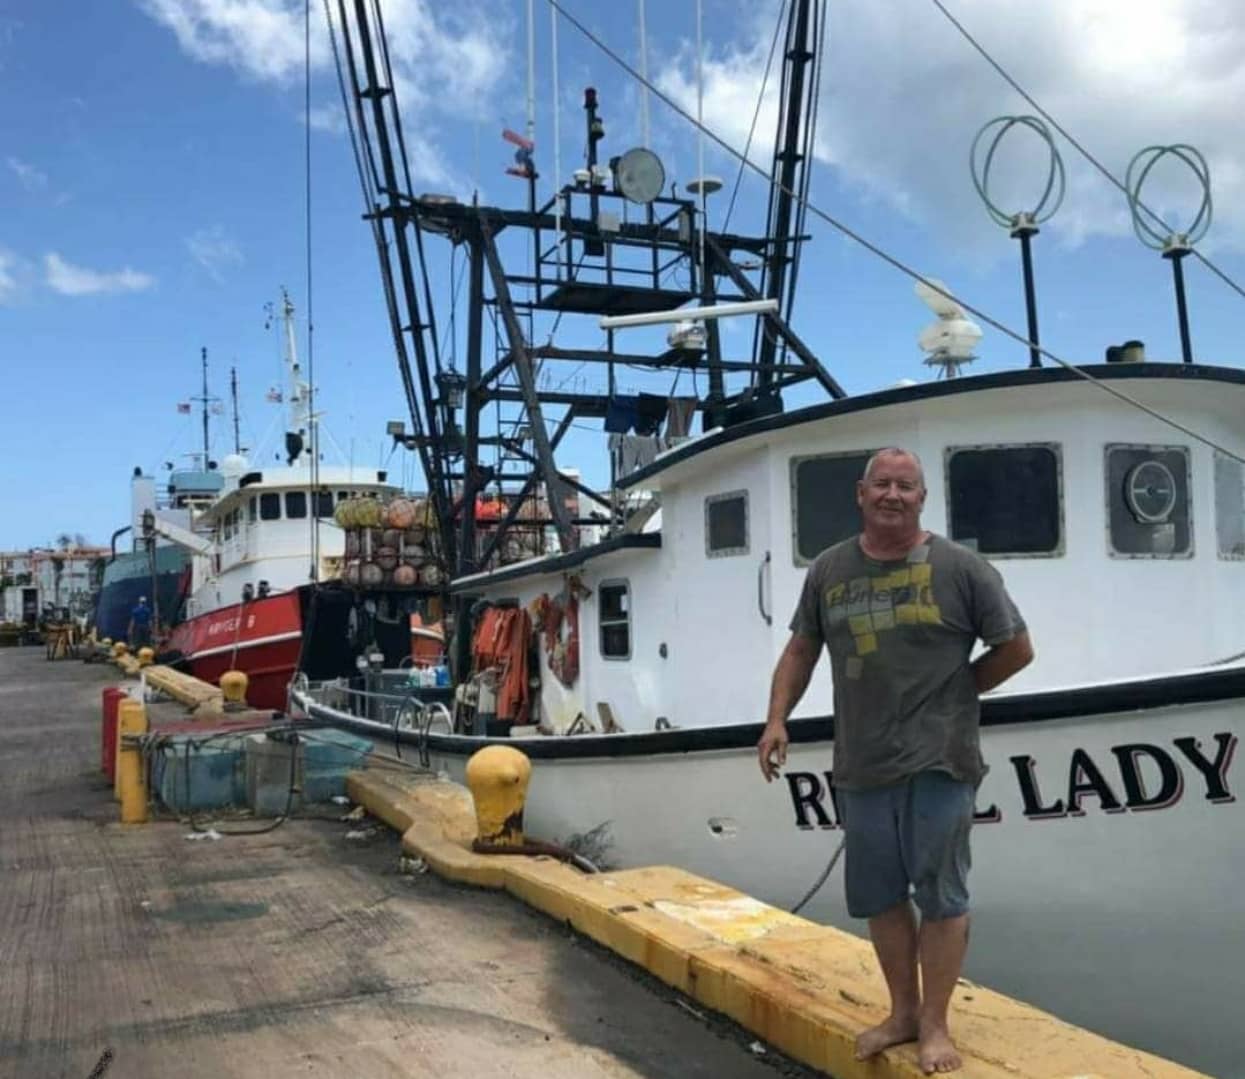 U.S. Fisherman Languishes In 'Medieval' Jail Cell In The British Virgin Islands, 3 U.S. Leaders Are Monitoring